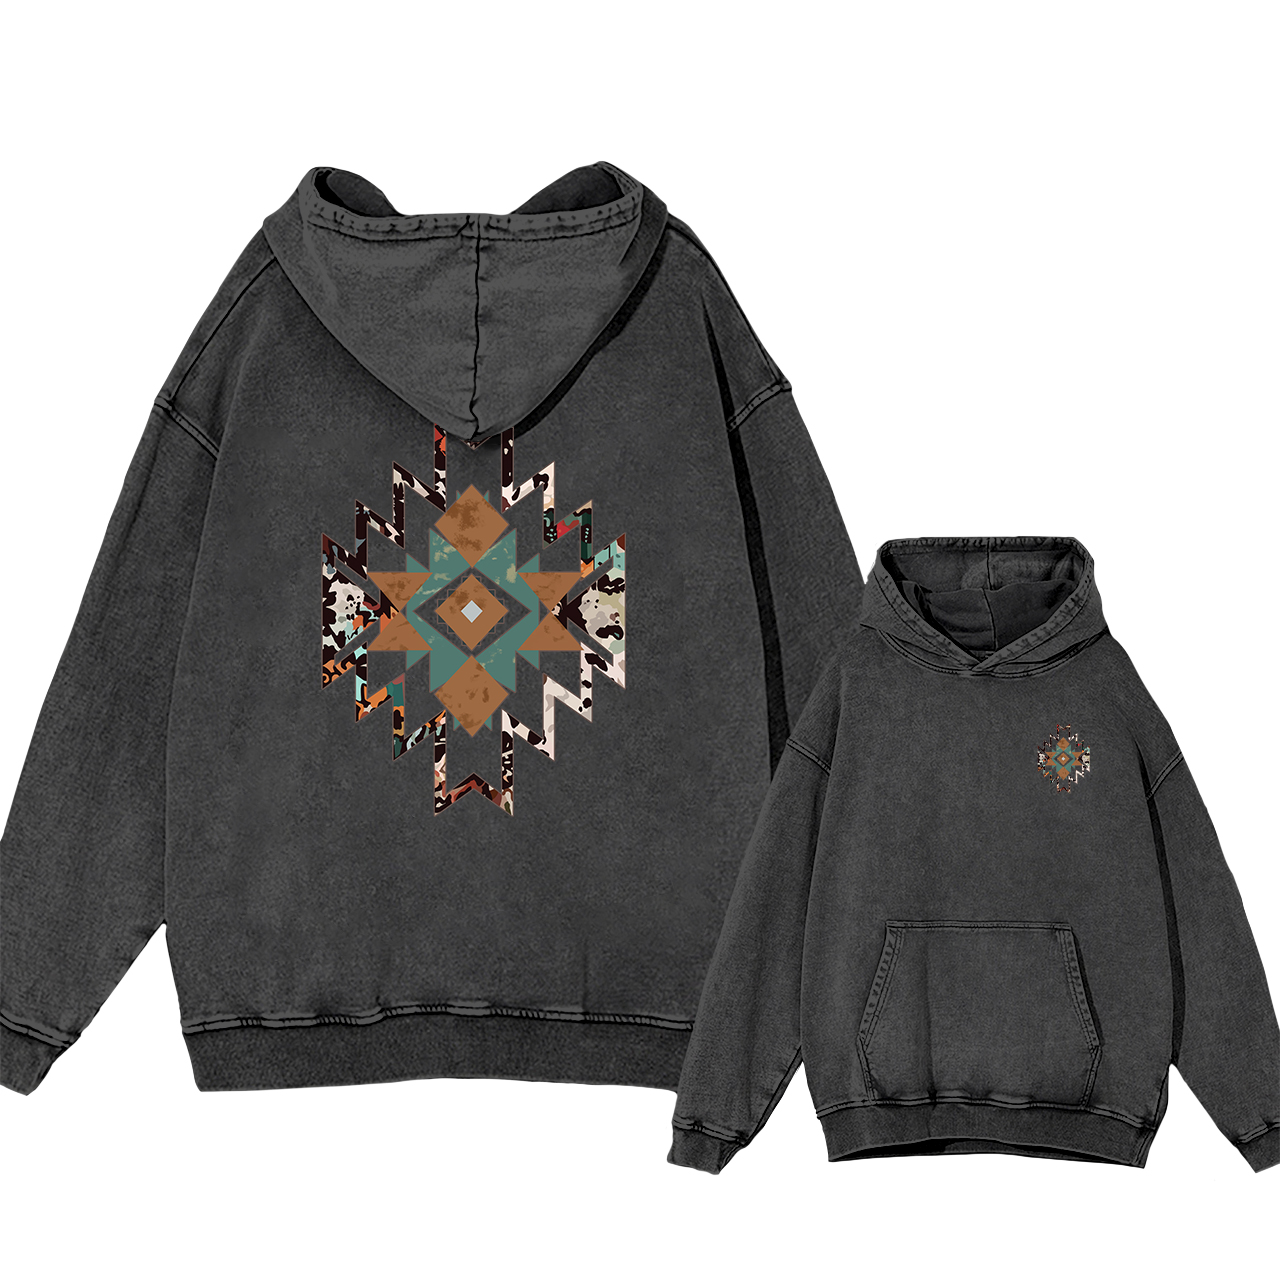 Cowboy Aztec Double-Sided Print Hoodies